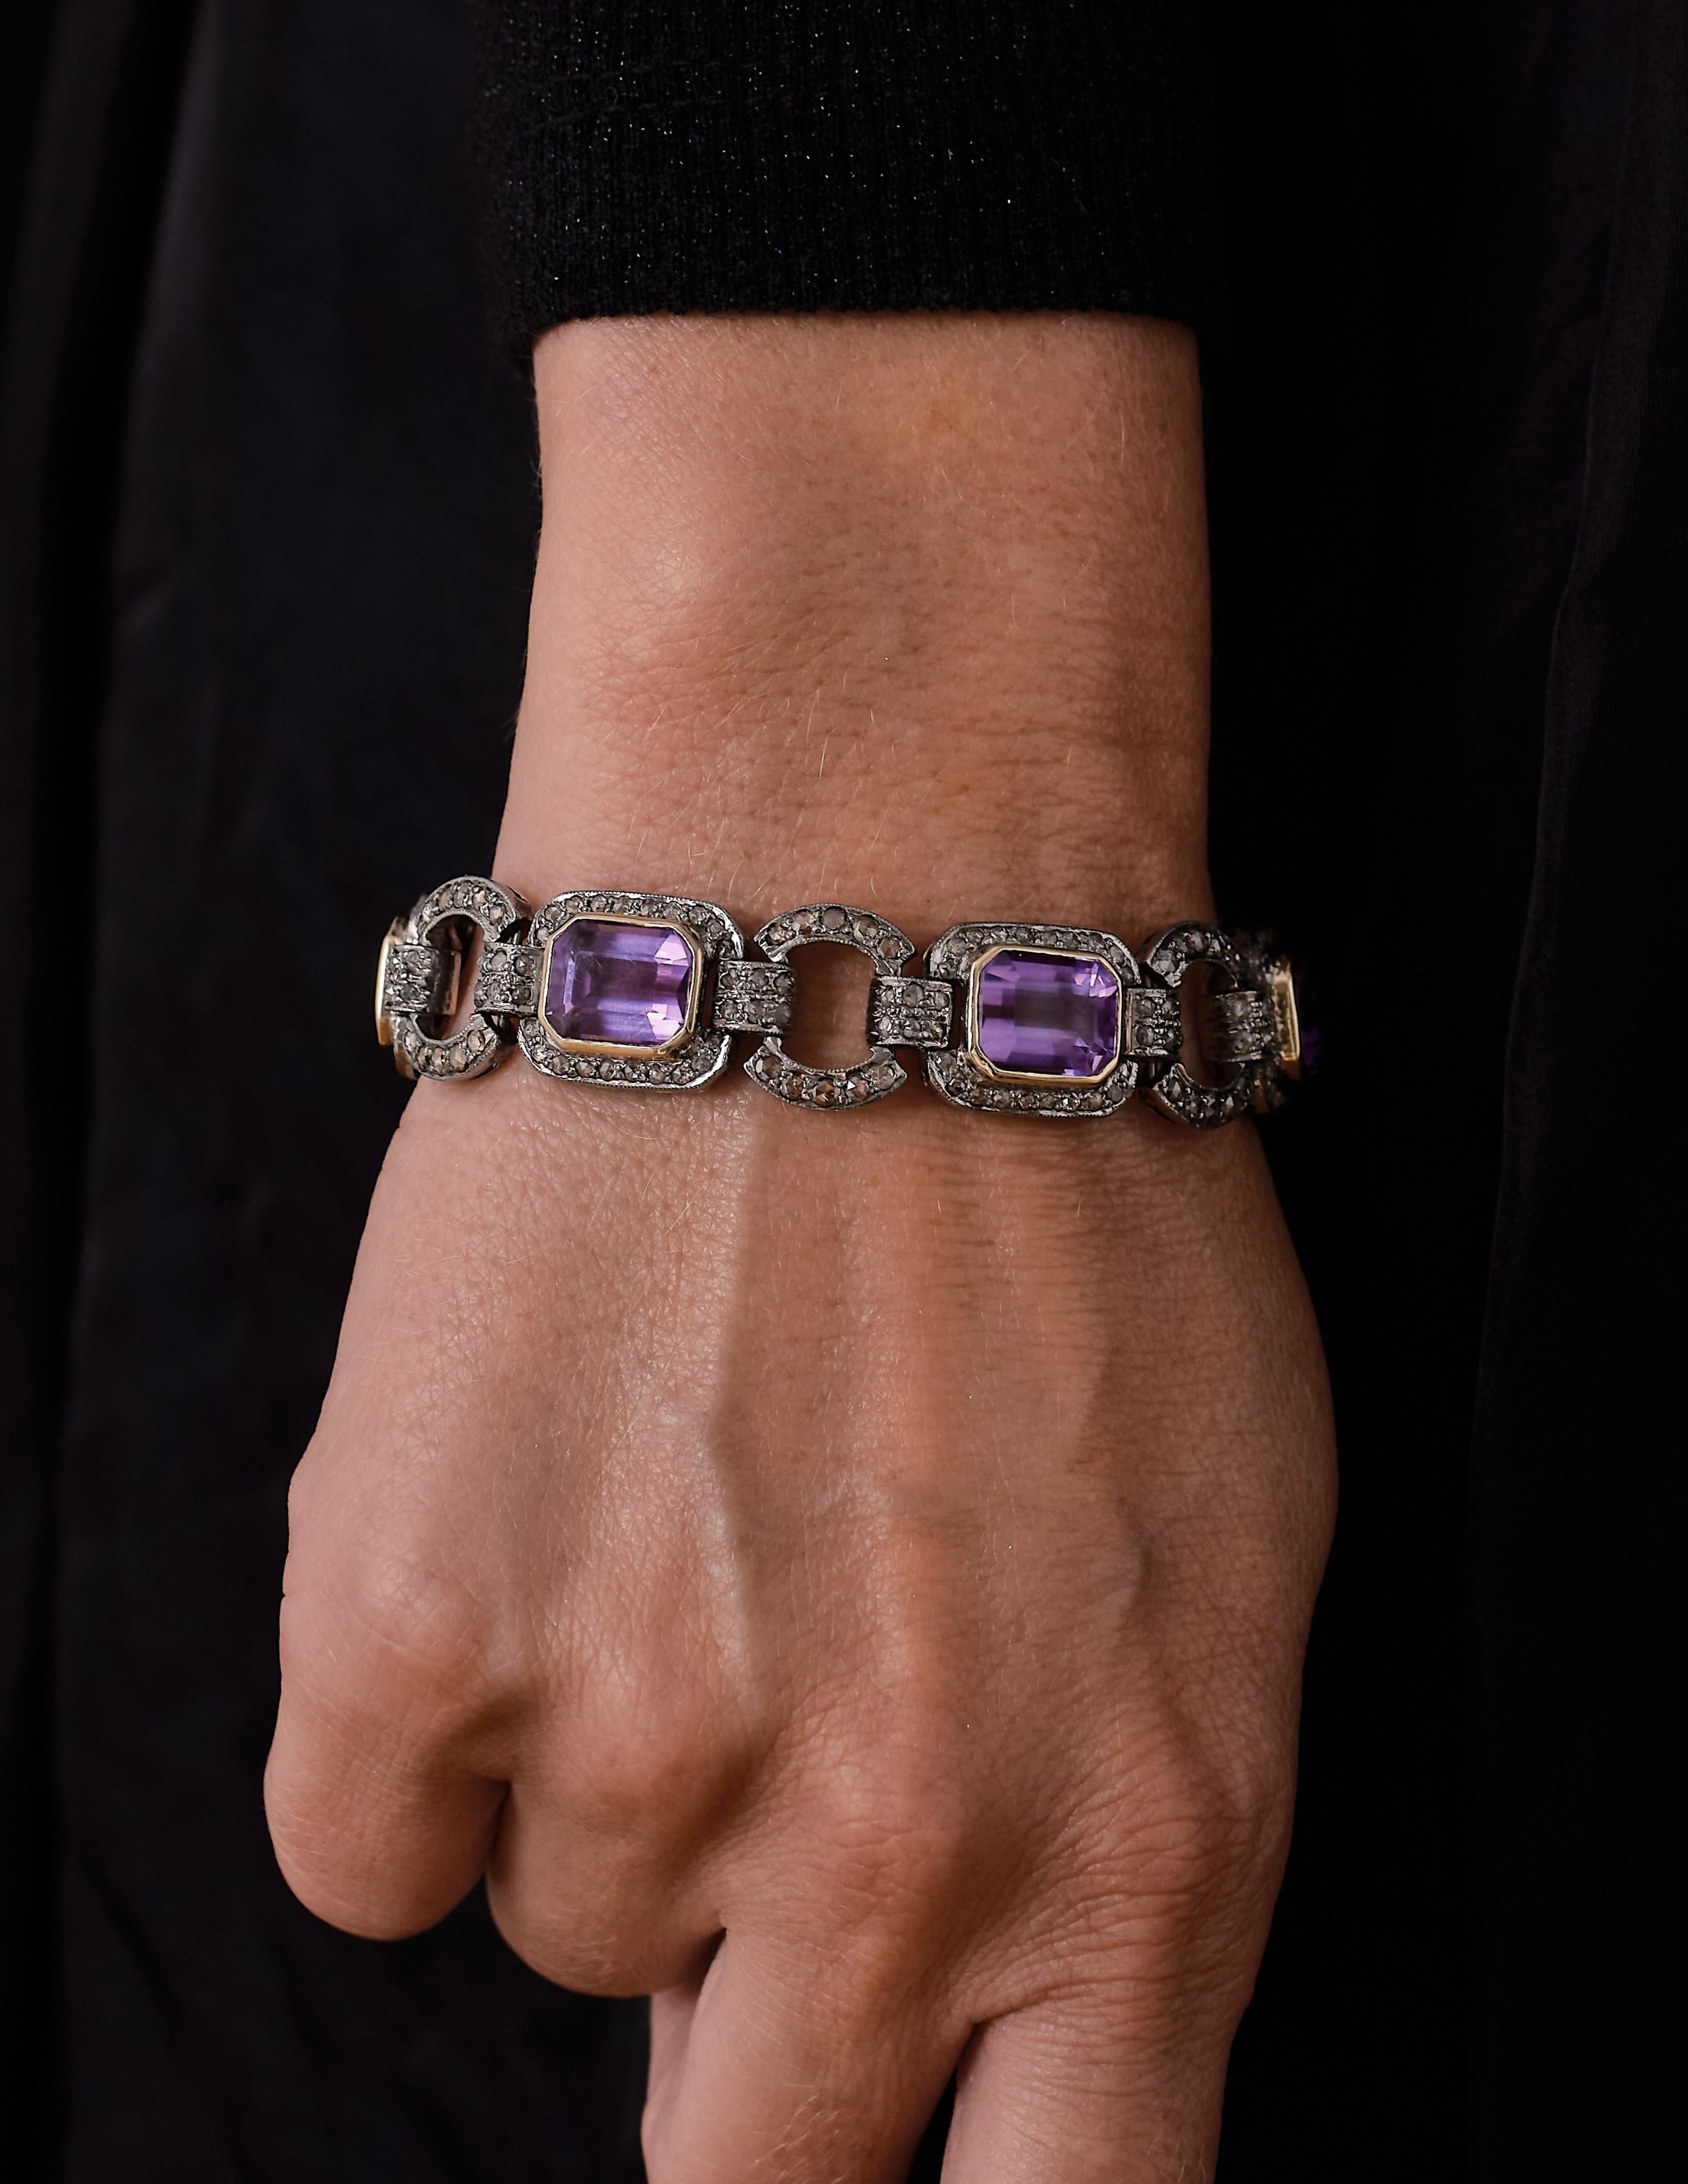 Rare antique Belle Epoque natural amethyst bracelet. 

Set with 6 gorgeous lilac Russian amethysts weighing together approx. 24.84 ct. and shimmering rose cut diamonds totaling approx. 5.40 ct. 

This utterly lovely and feminine Edwardian bracelet